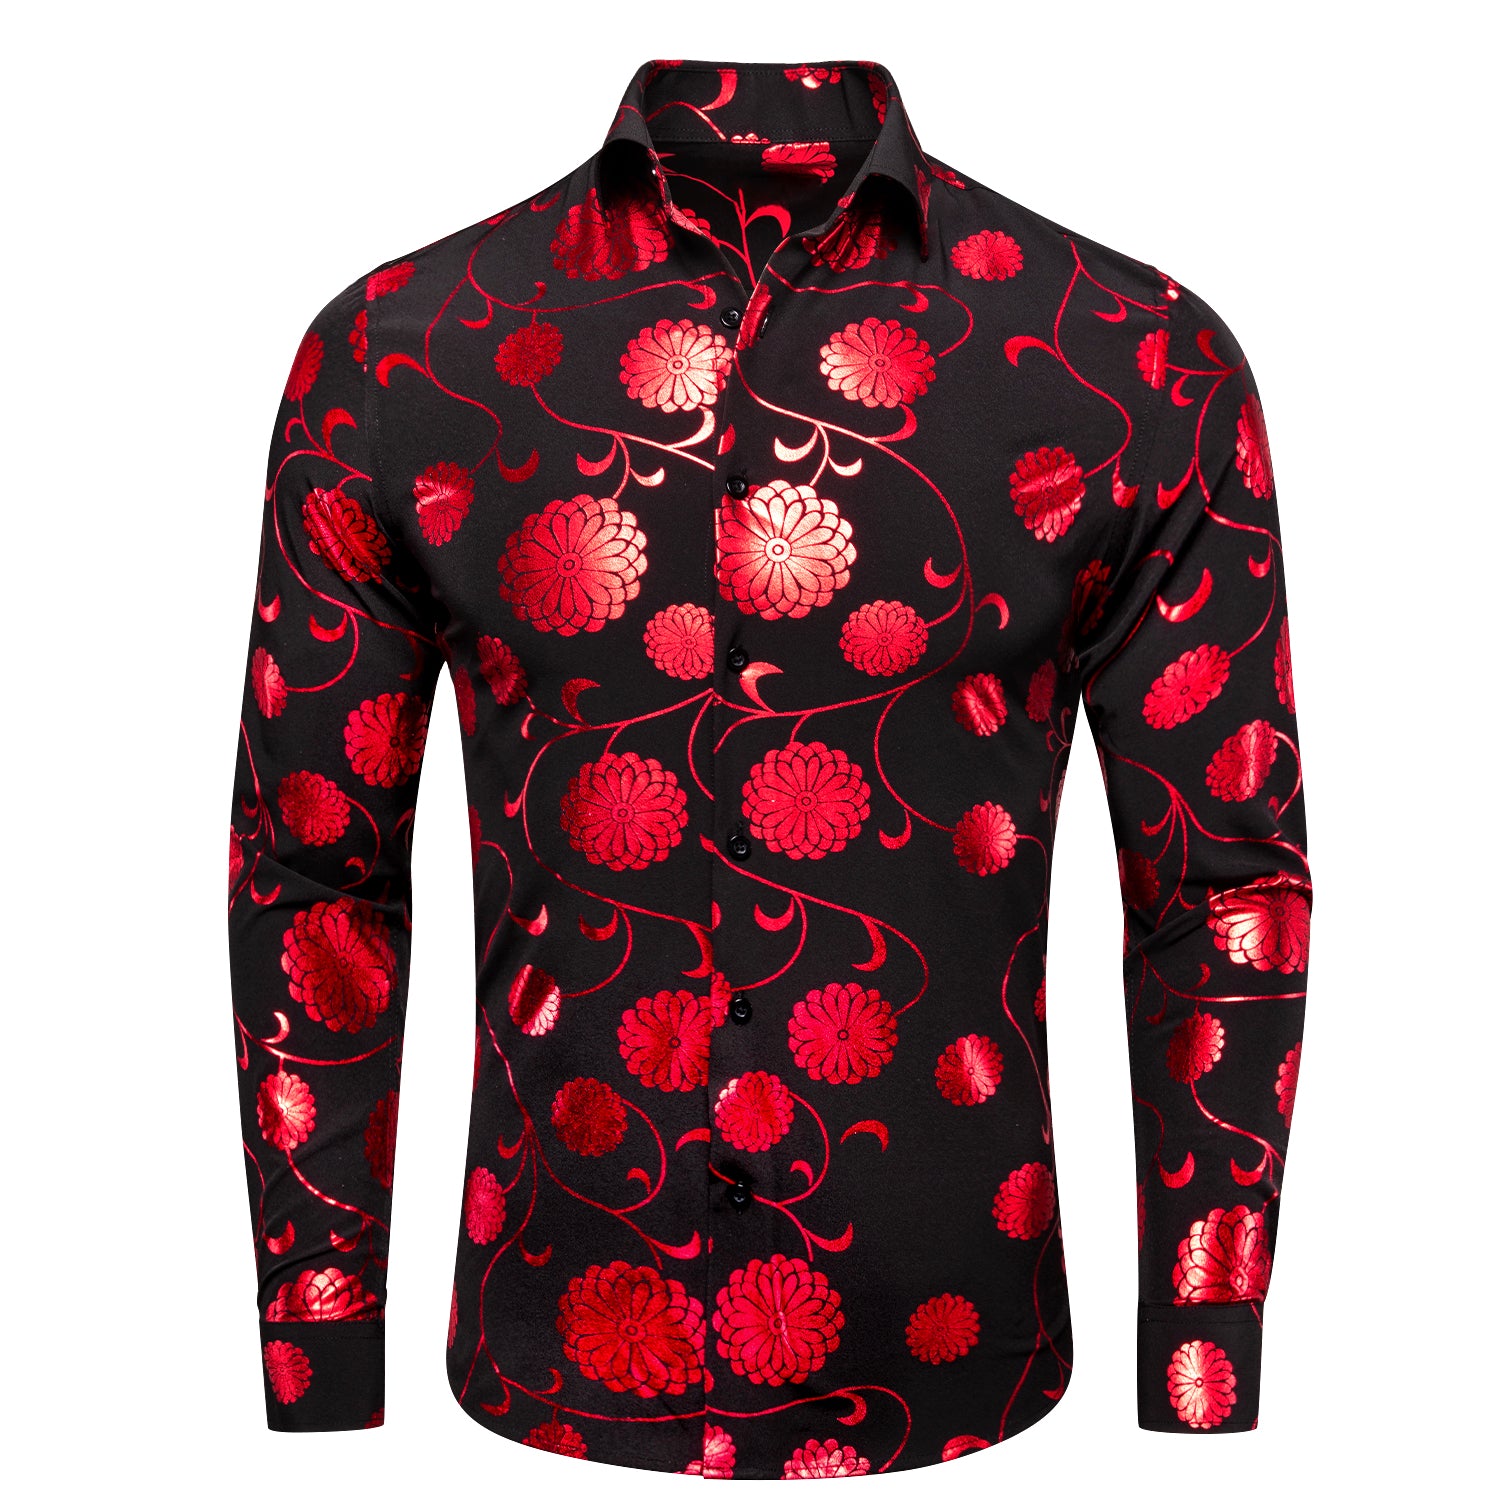 Clearance Sale New Black Red Flower Men's Shirt